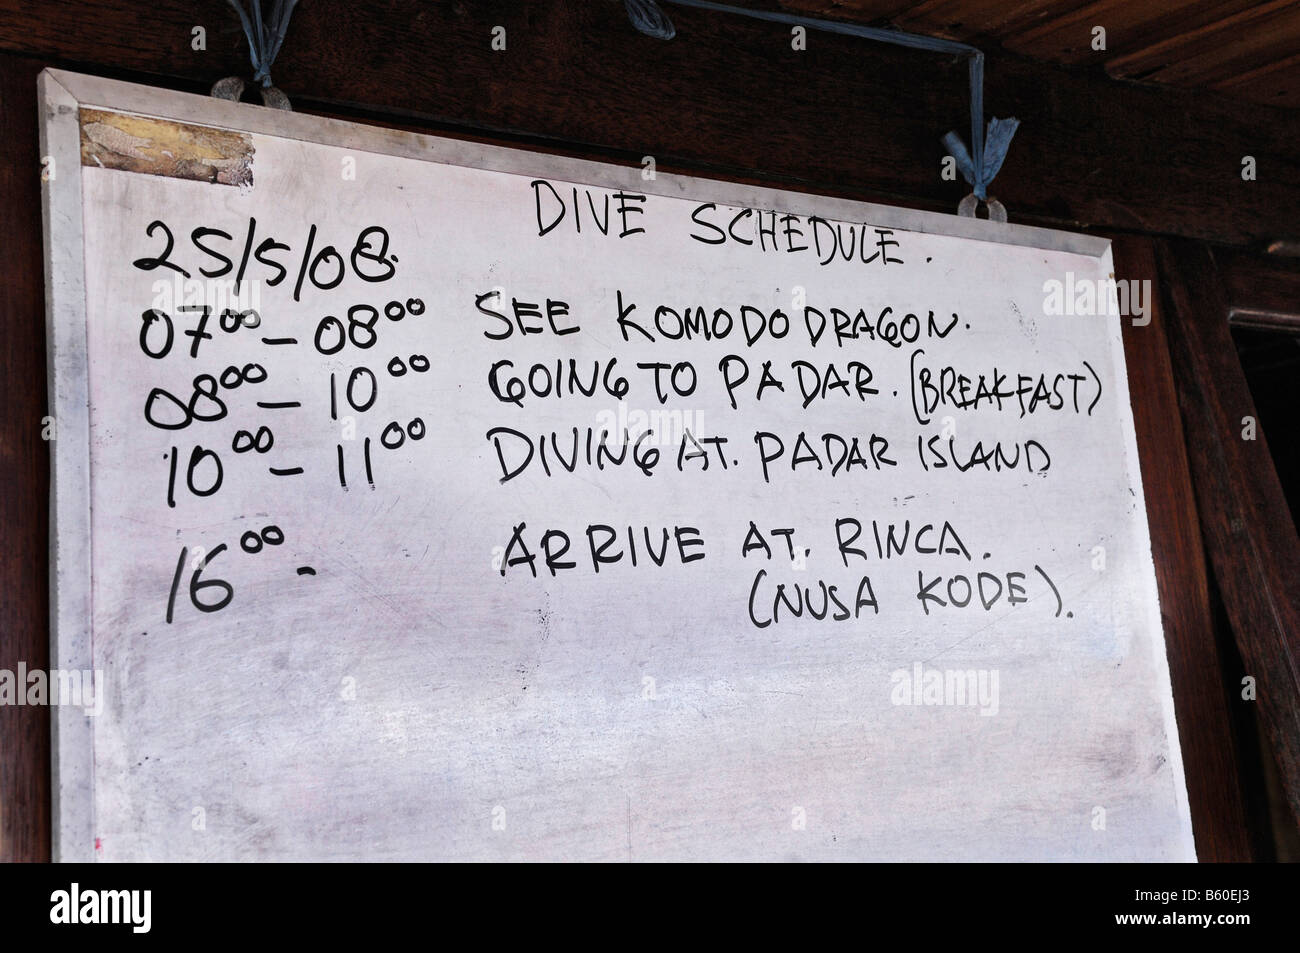 Diving schedule on the MS-Felicia, Komodo National Park, World Heritage Site, Komodo, Indonesia, Asia Stock Photo